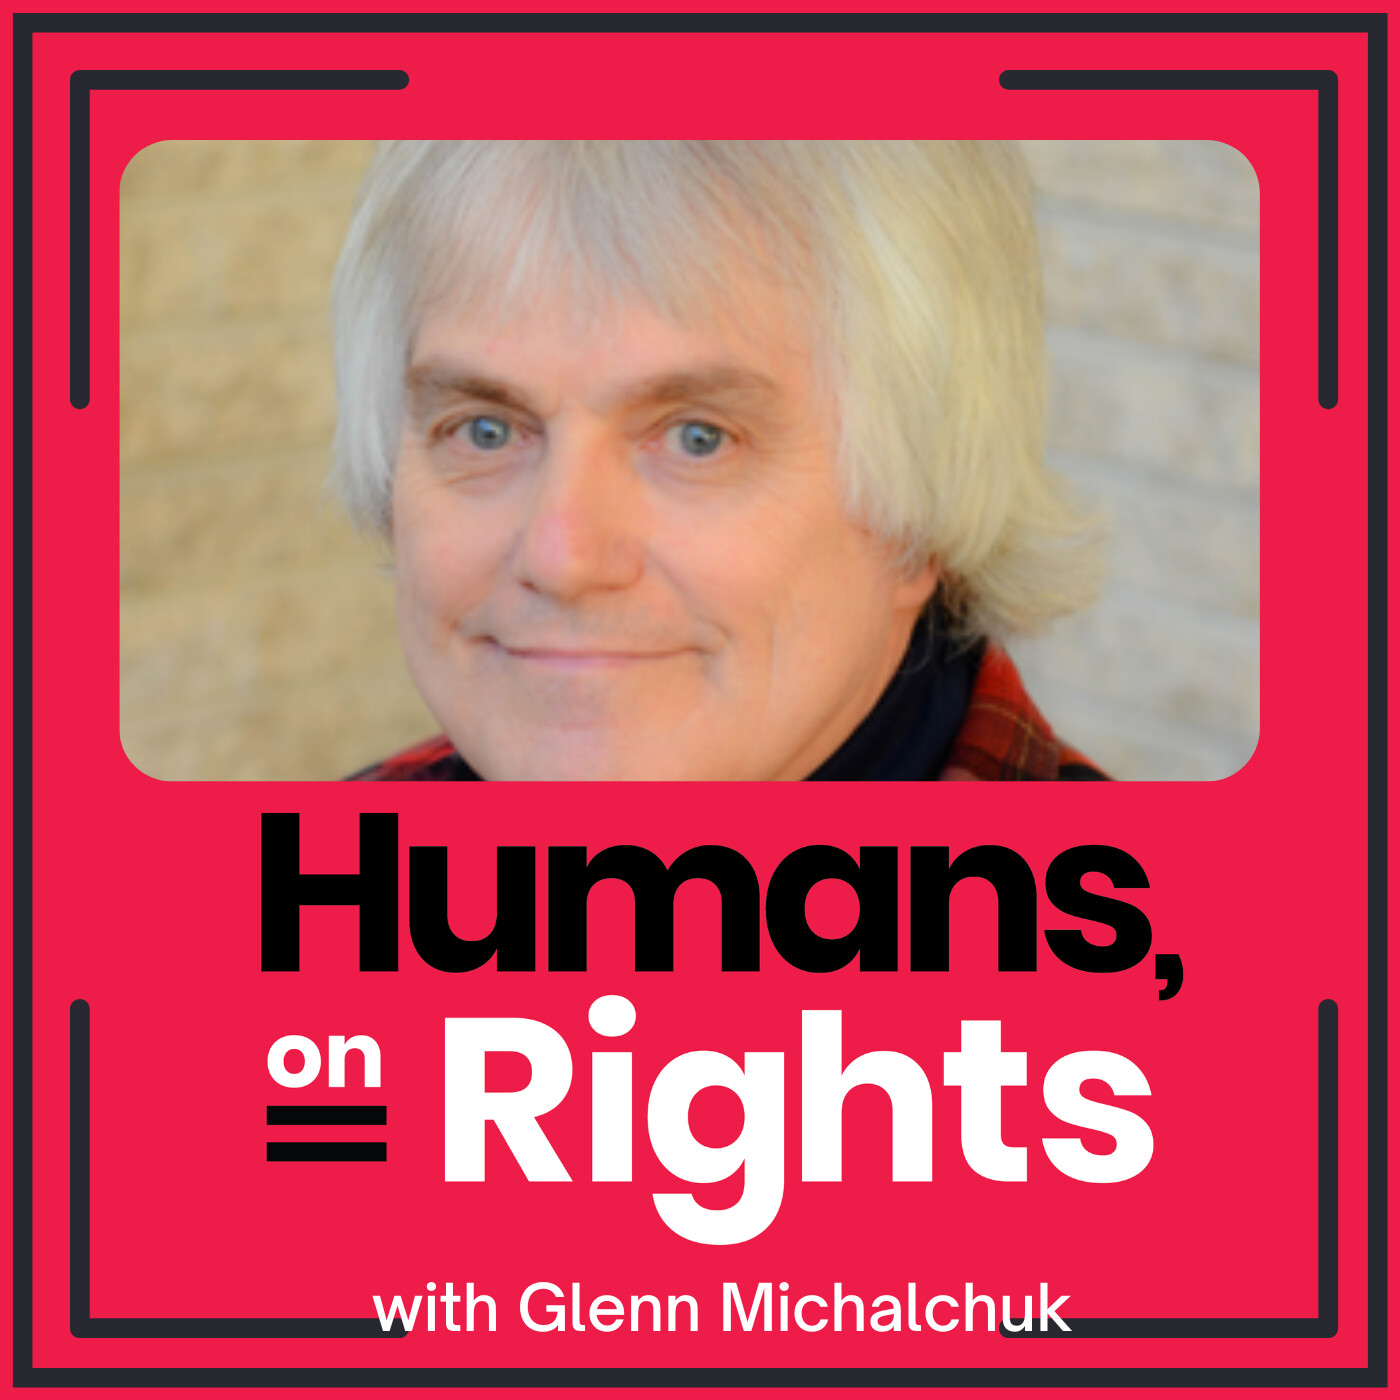 Glenn Michalchuk: The absence of war is NOT the definition of Peace!